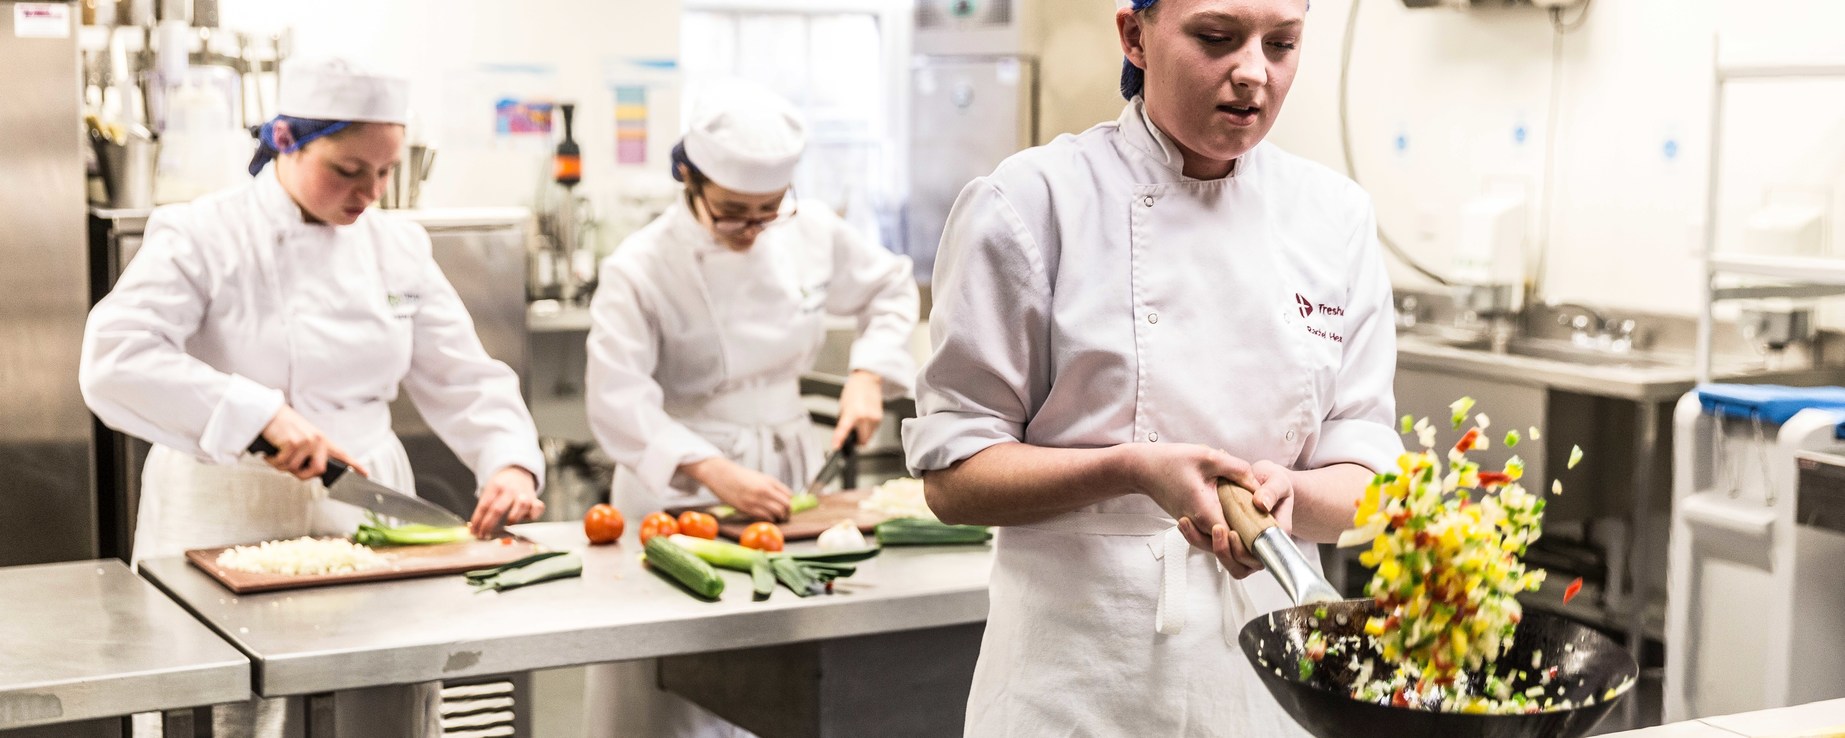 Live in catering jobs in the uk